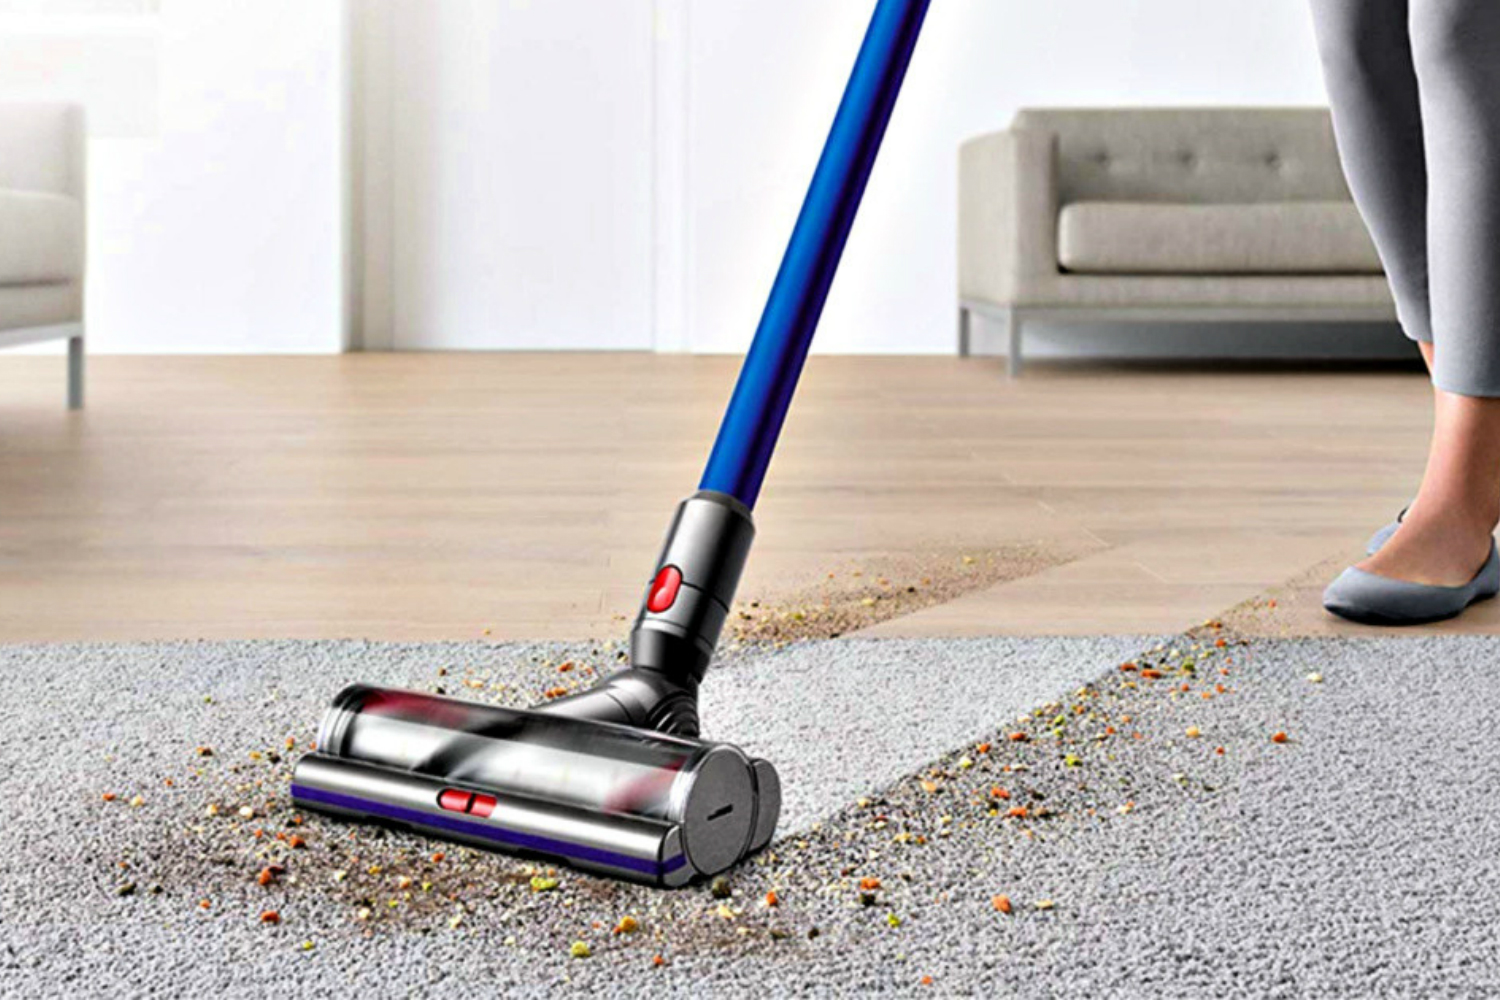 The Best Cordless Vacuums | Digital Trends